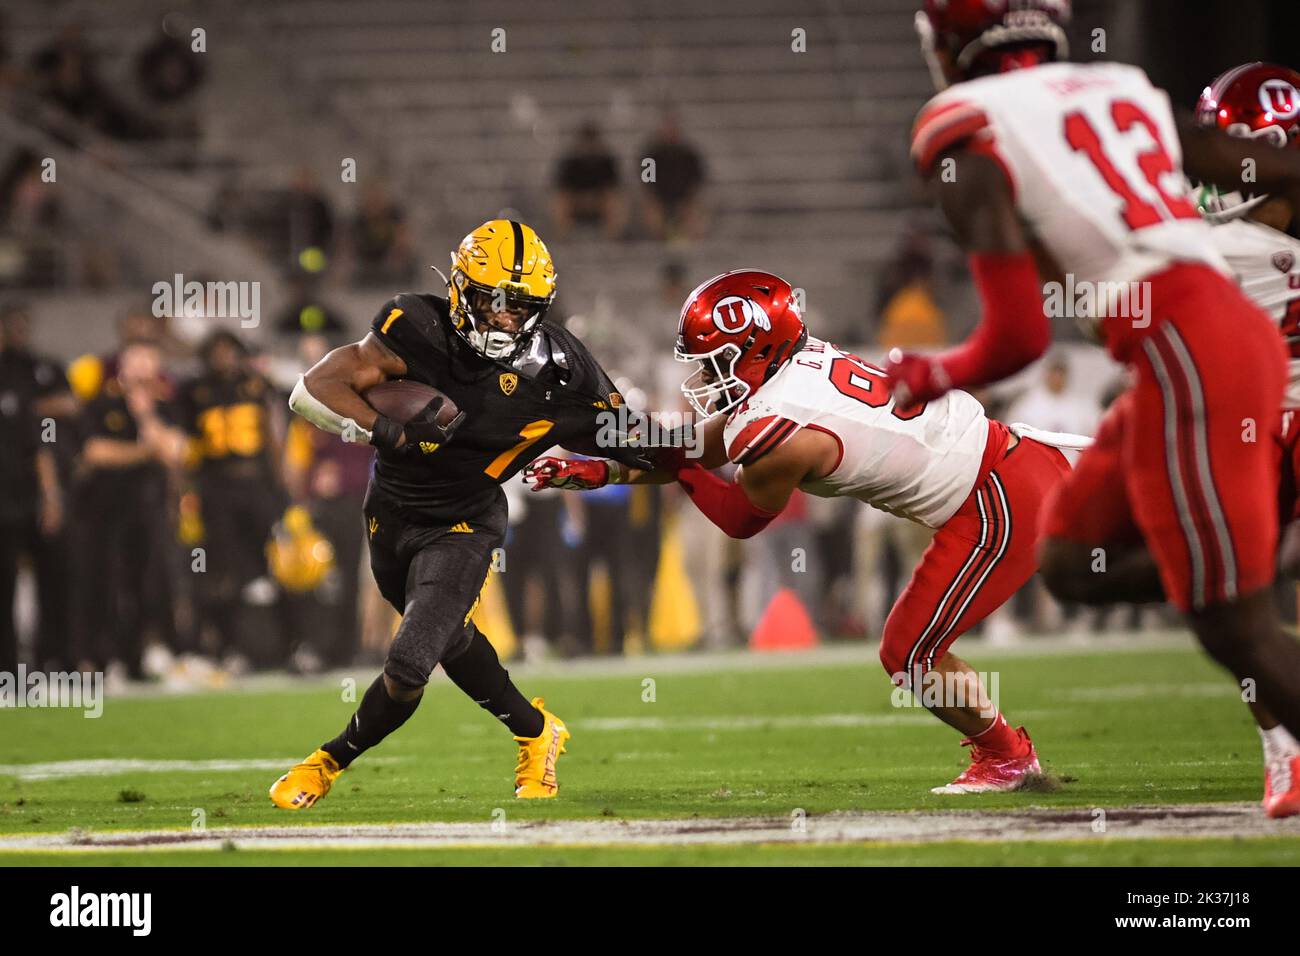 Arizona State running back Xazavian Valladay (1) attempts to break free in the fourth quarter of an NCAA college football game against the Utah Utes i Stock Photo